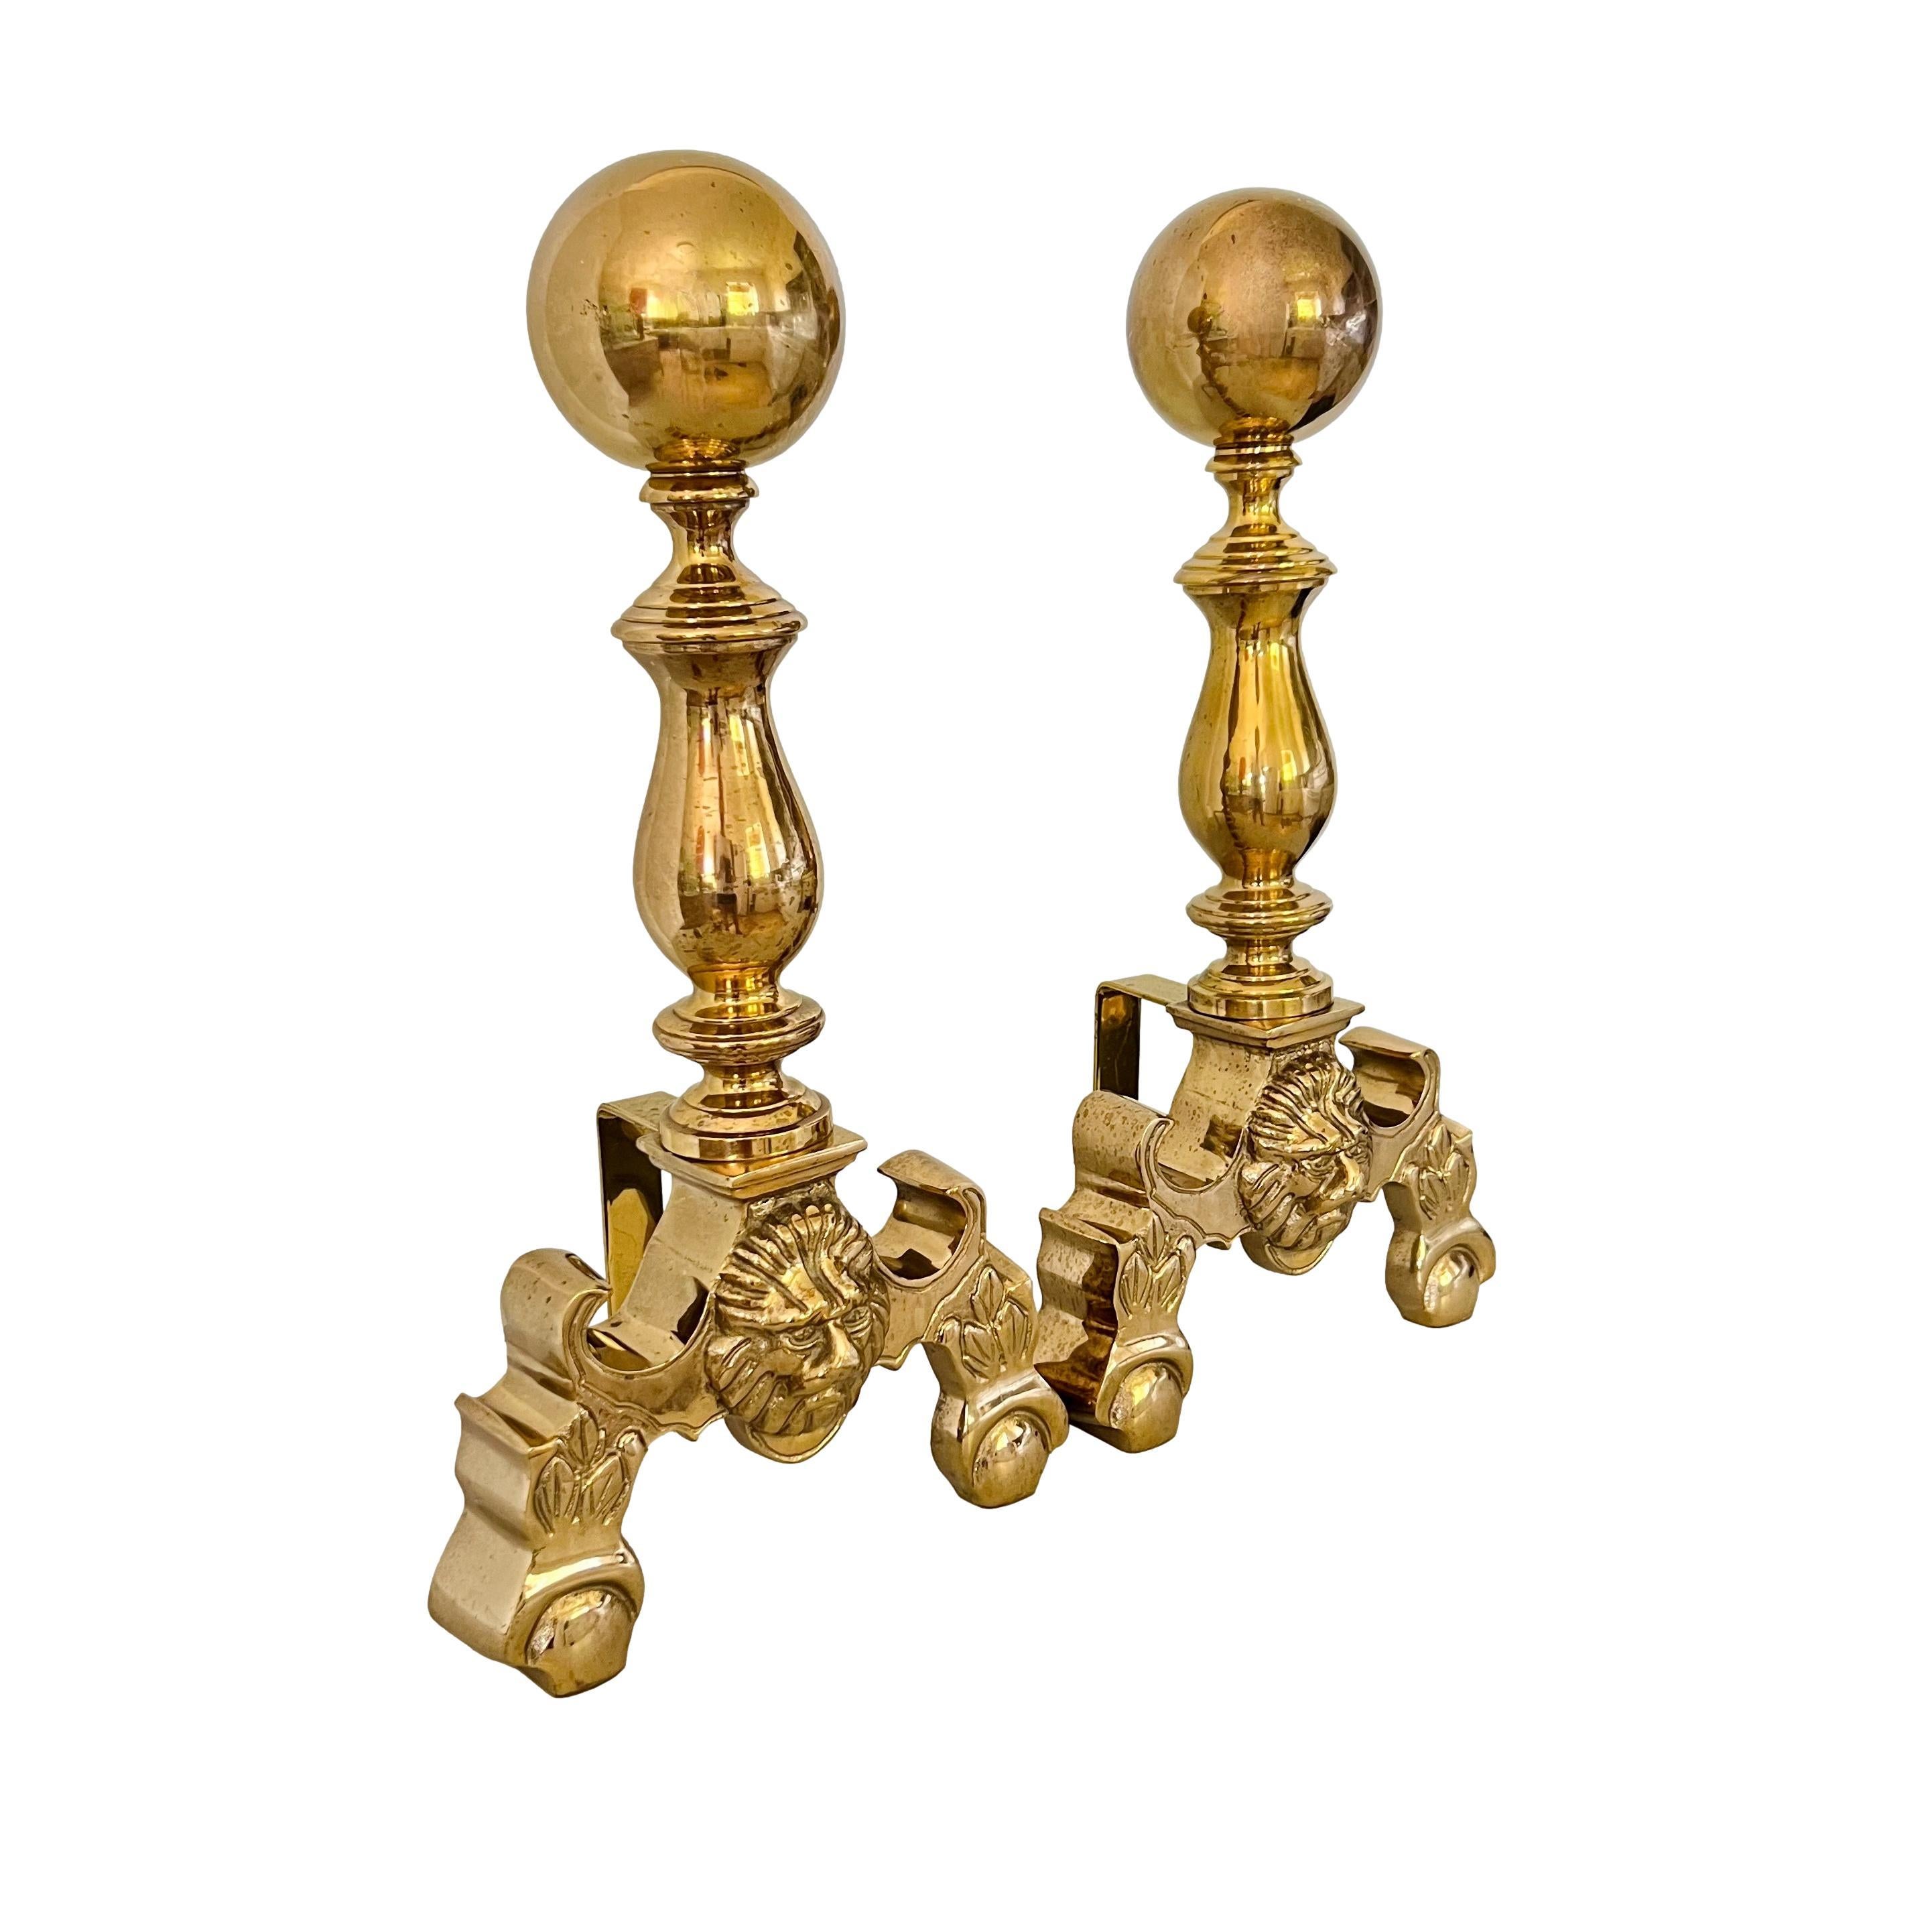 A vintage pair of French Empire style chenets or andirons. Heavy brass featuring neoclassical lion heads and large cannonball toppers. Made by Sunset.

Dimensions: 9